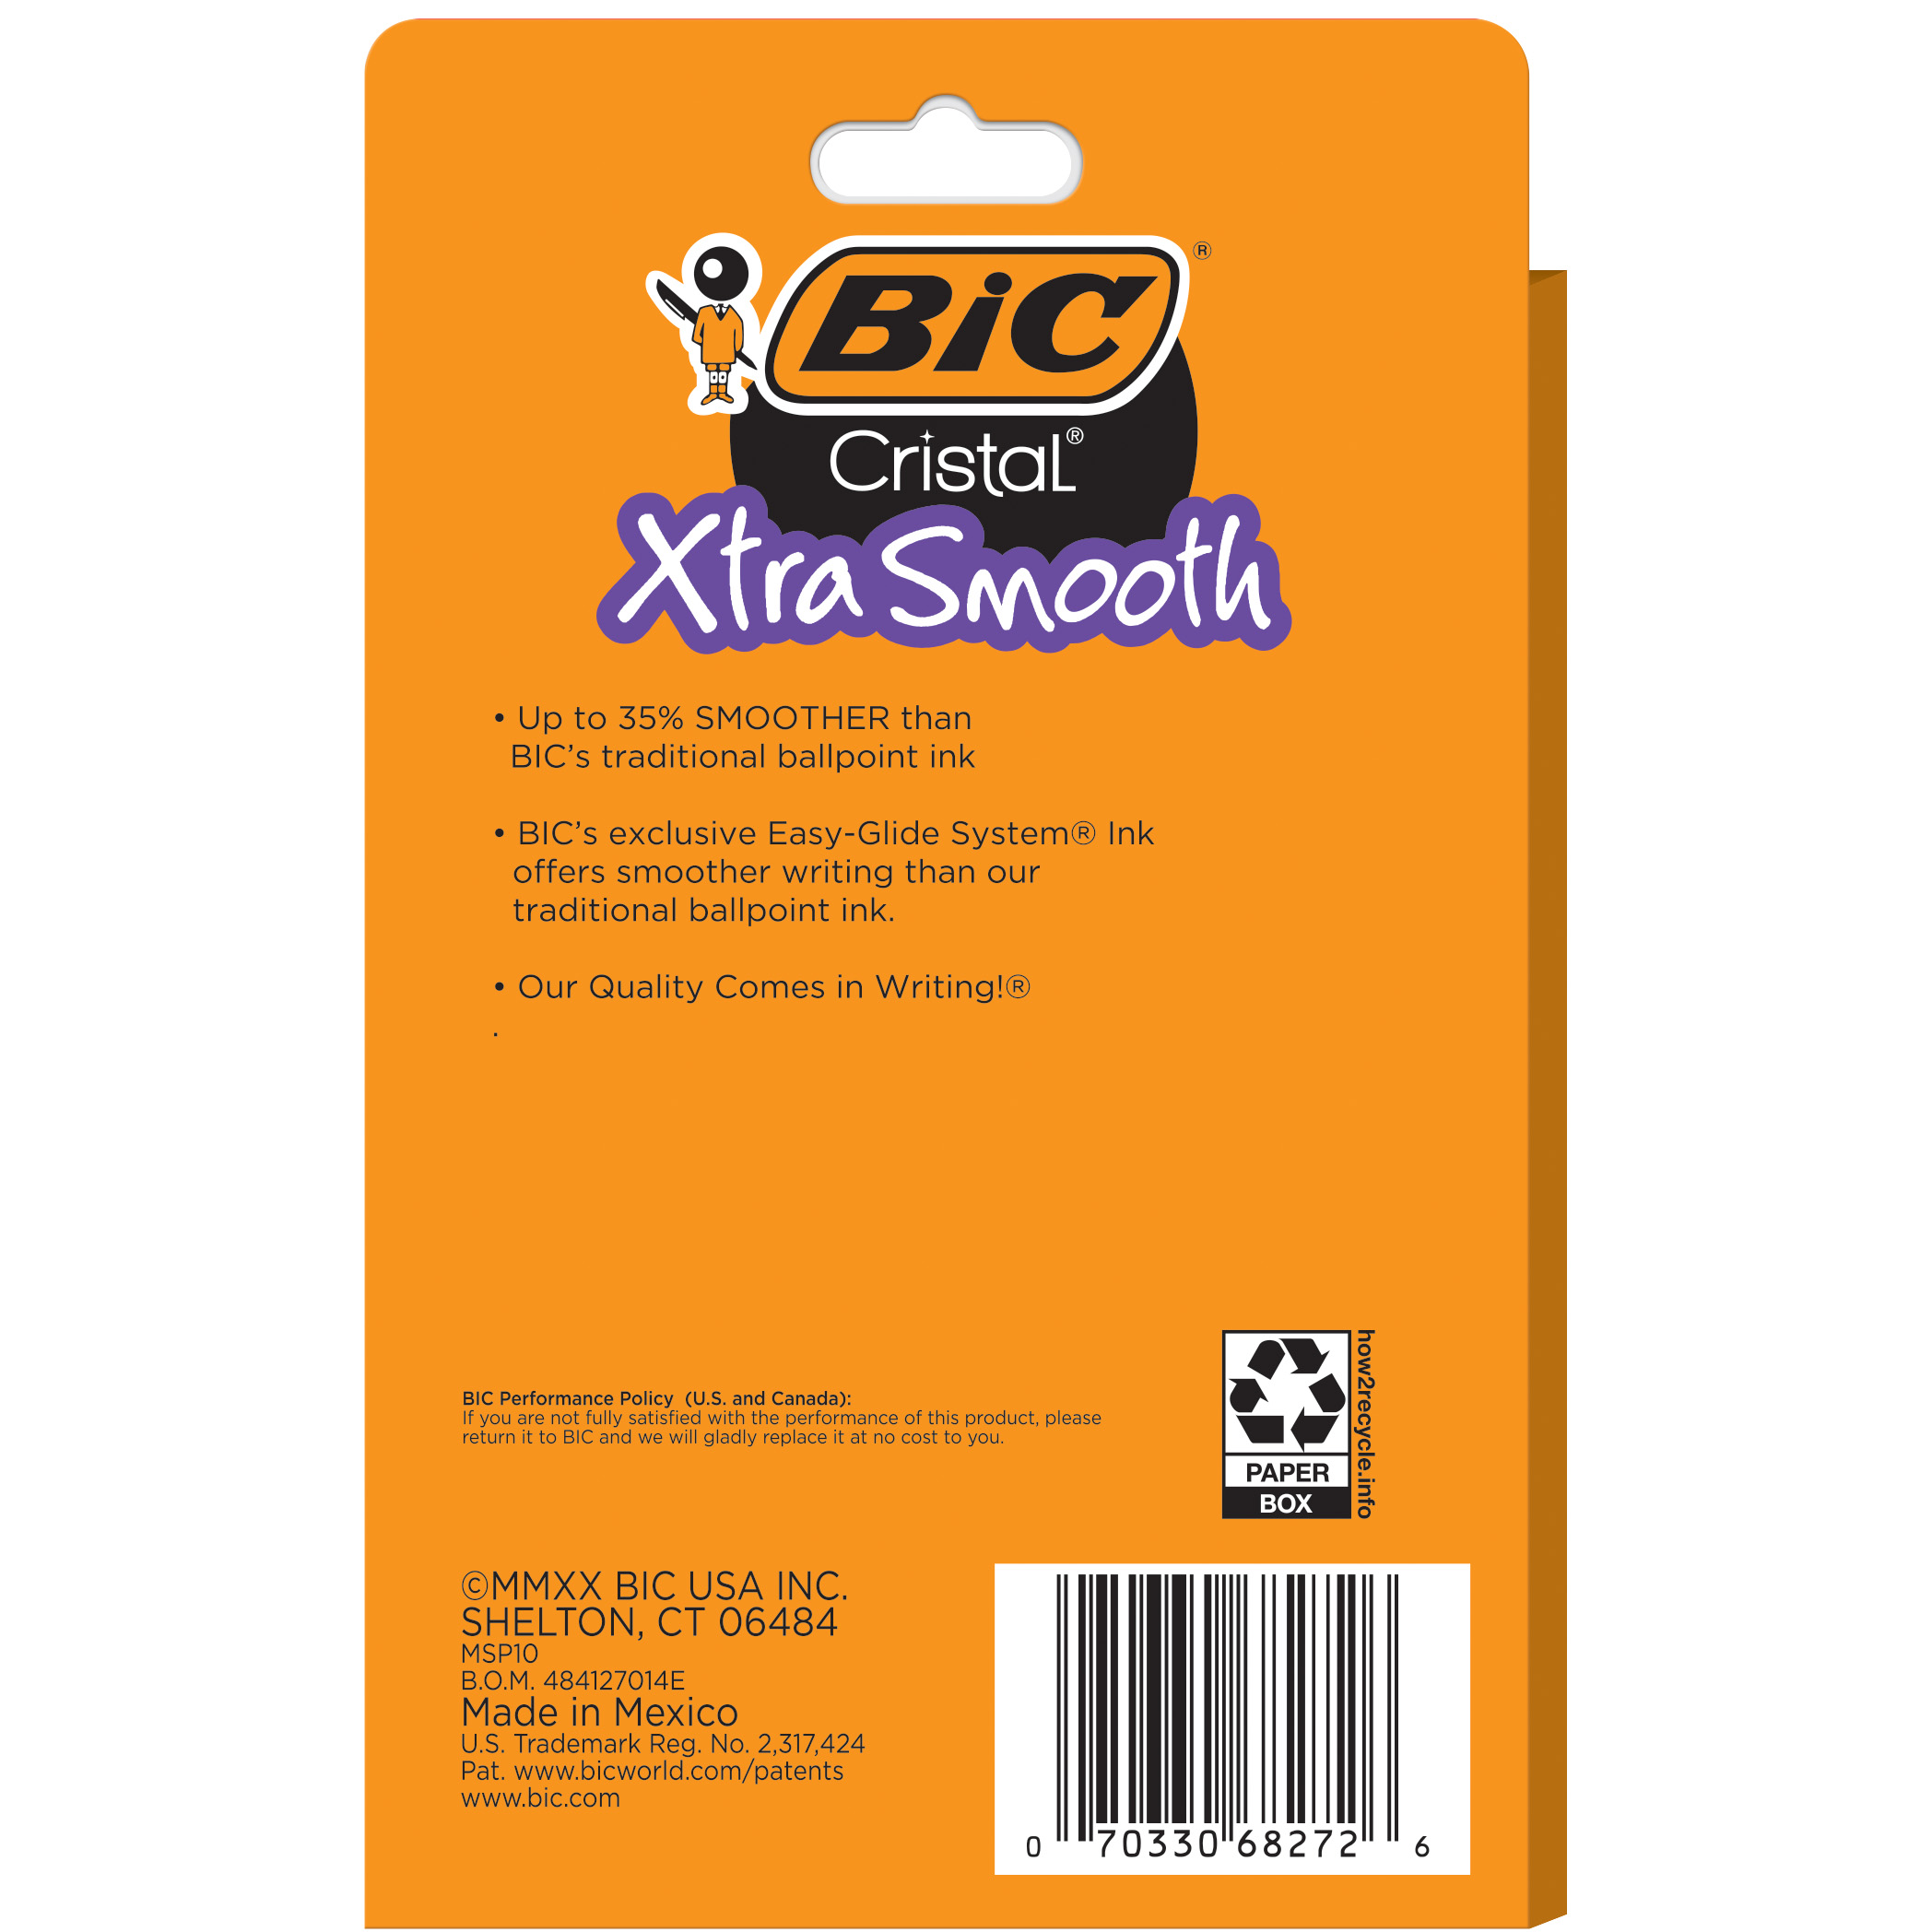 BIC Cristal Xtra Smooth Stic Ball Pens, 1.0 mm, Blue Ink, Pack of 10 - image 9 of 10